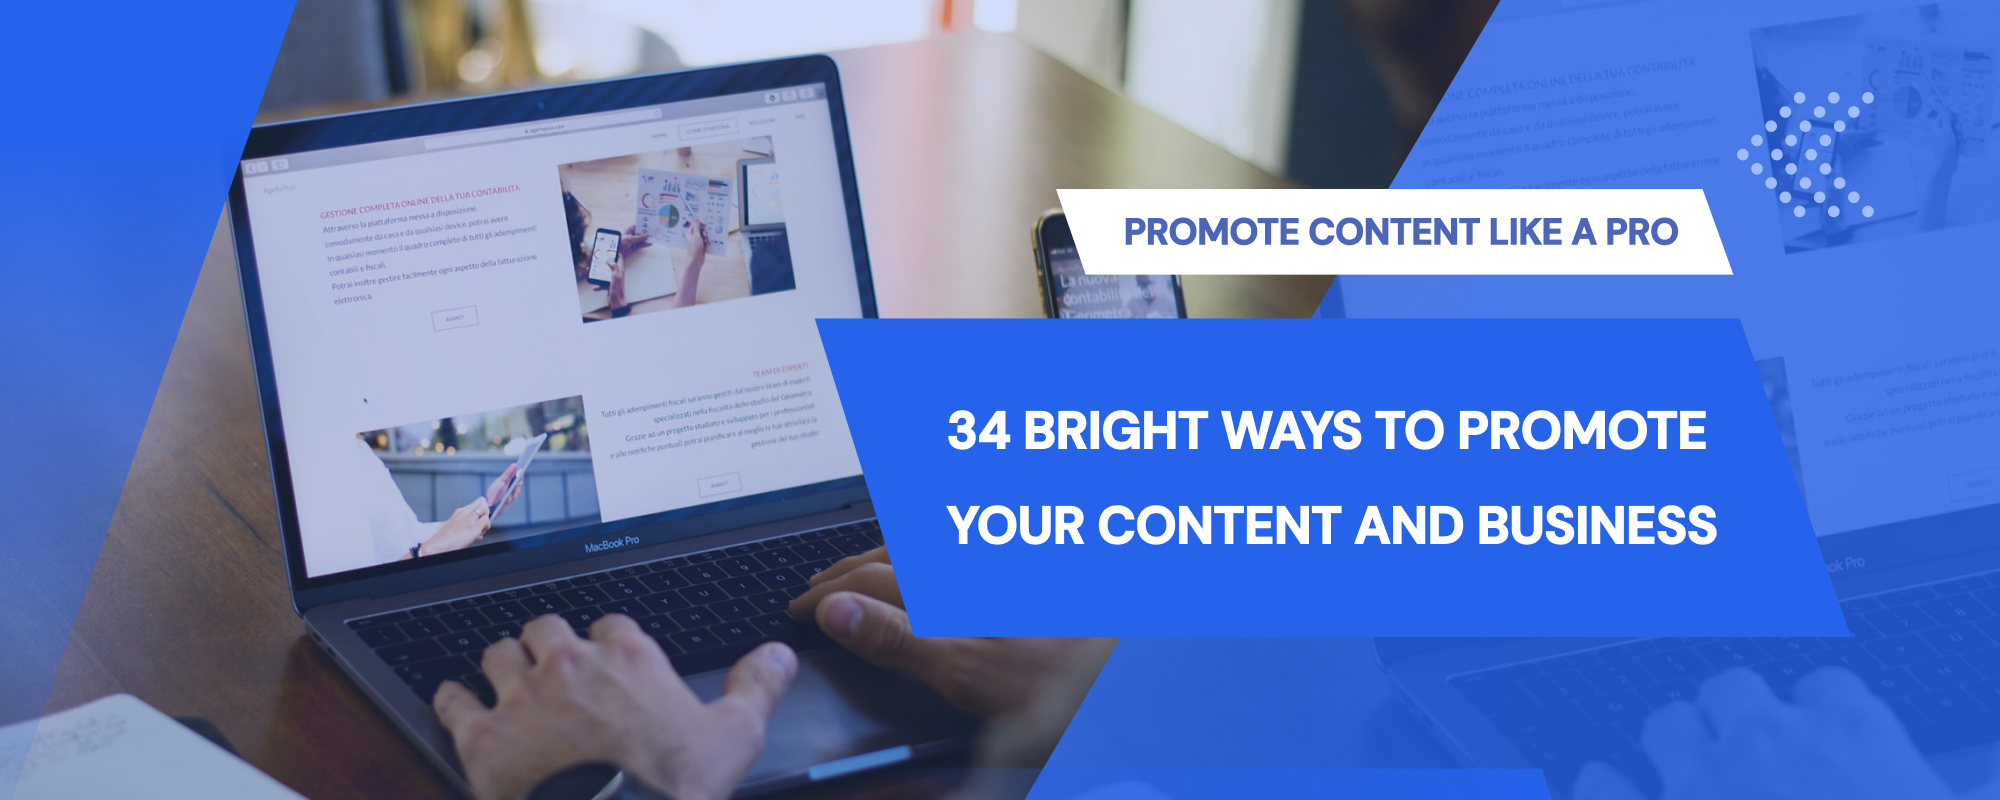 34 ways to promote your content online: Get traffic, generate leads, and welcome more customers to your business